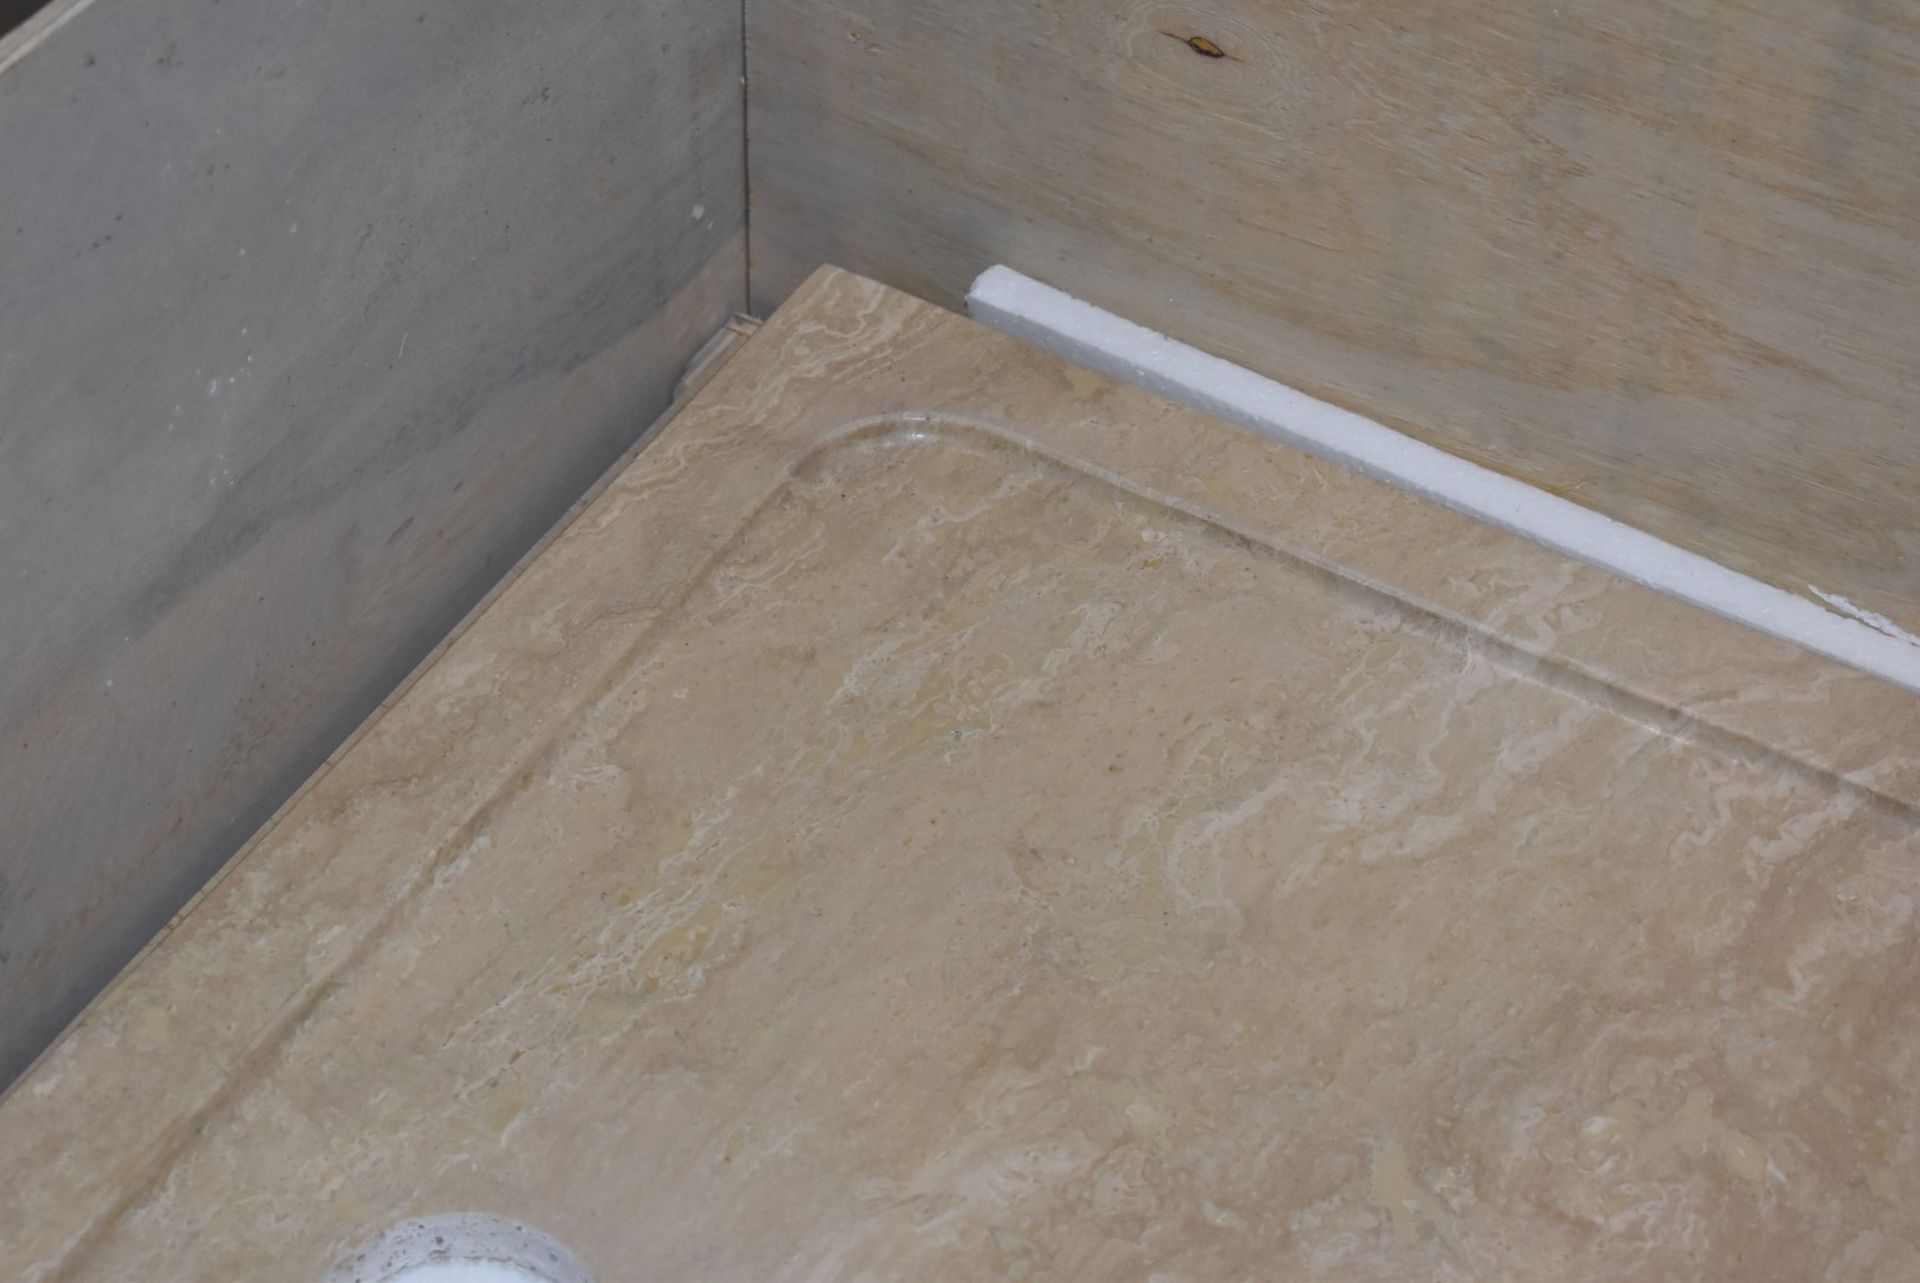 1 x Stonearth Luxury Solid Travertine Stone 900mm Shower Tray - Hand Made From Travertine Stone - Image 7 of 12